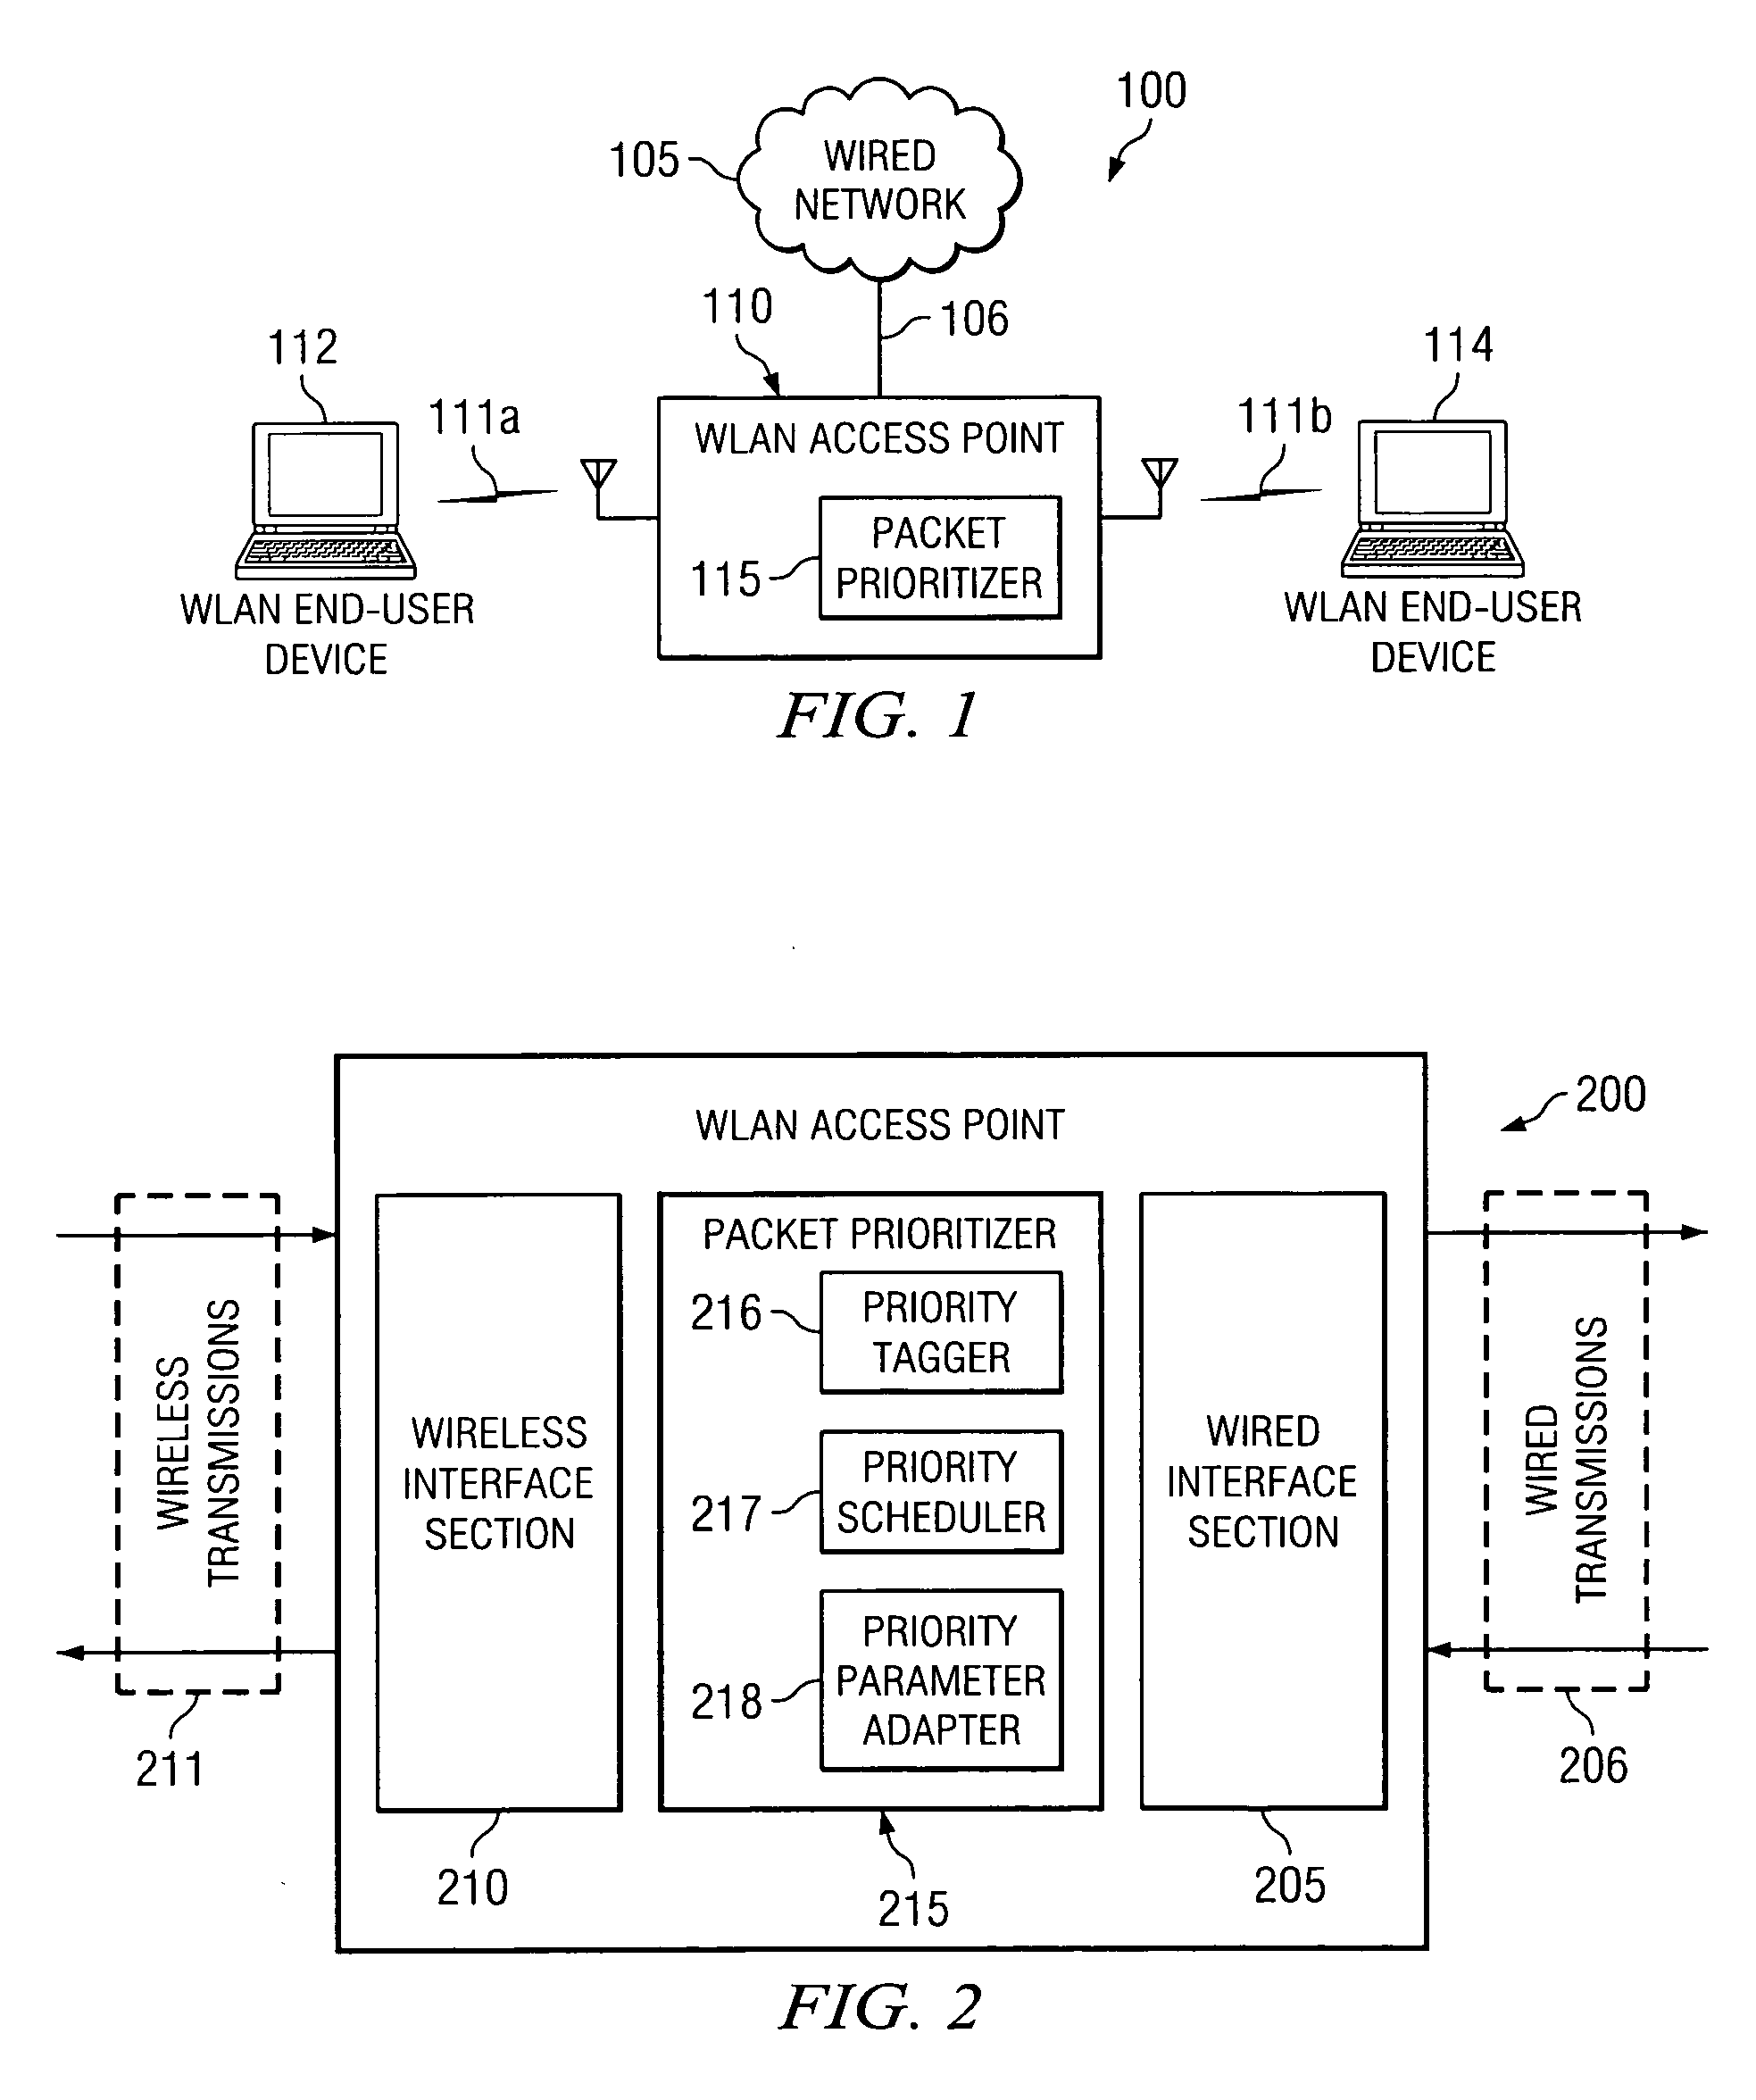 Packet-level service differentiation for quality of service provisioning over wireless local area networks